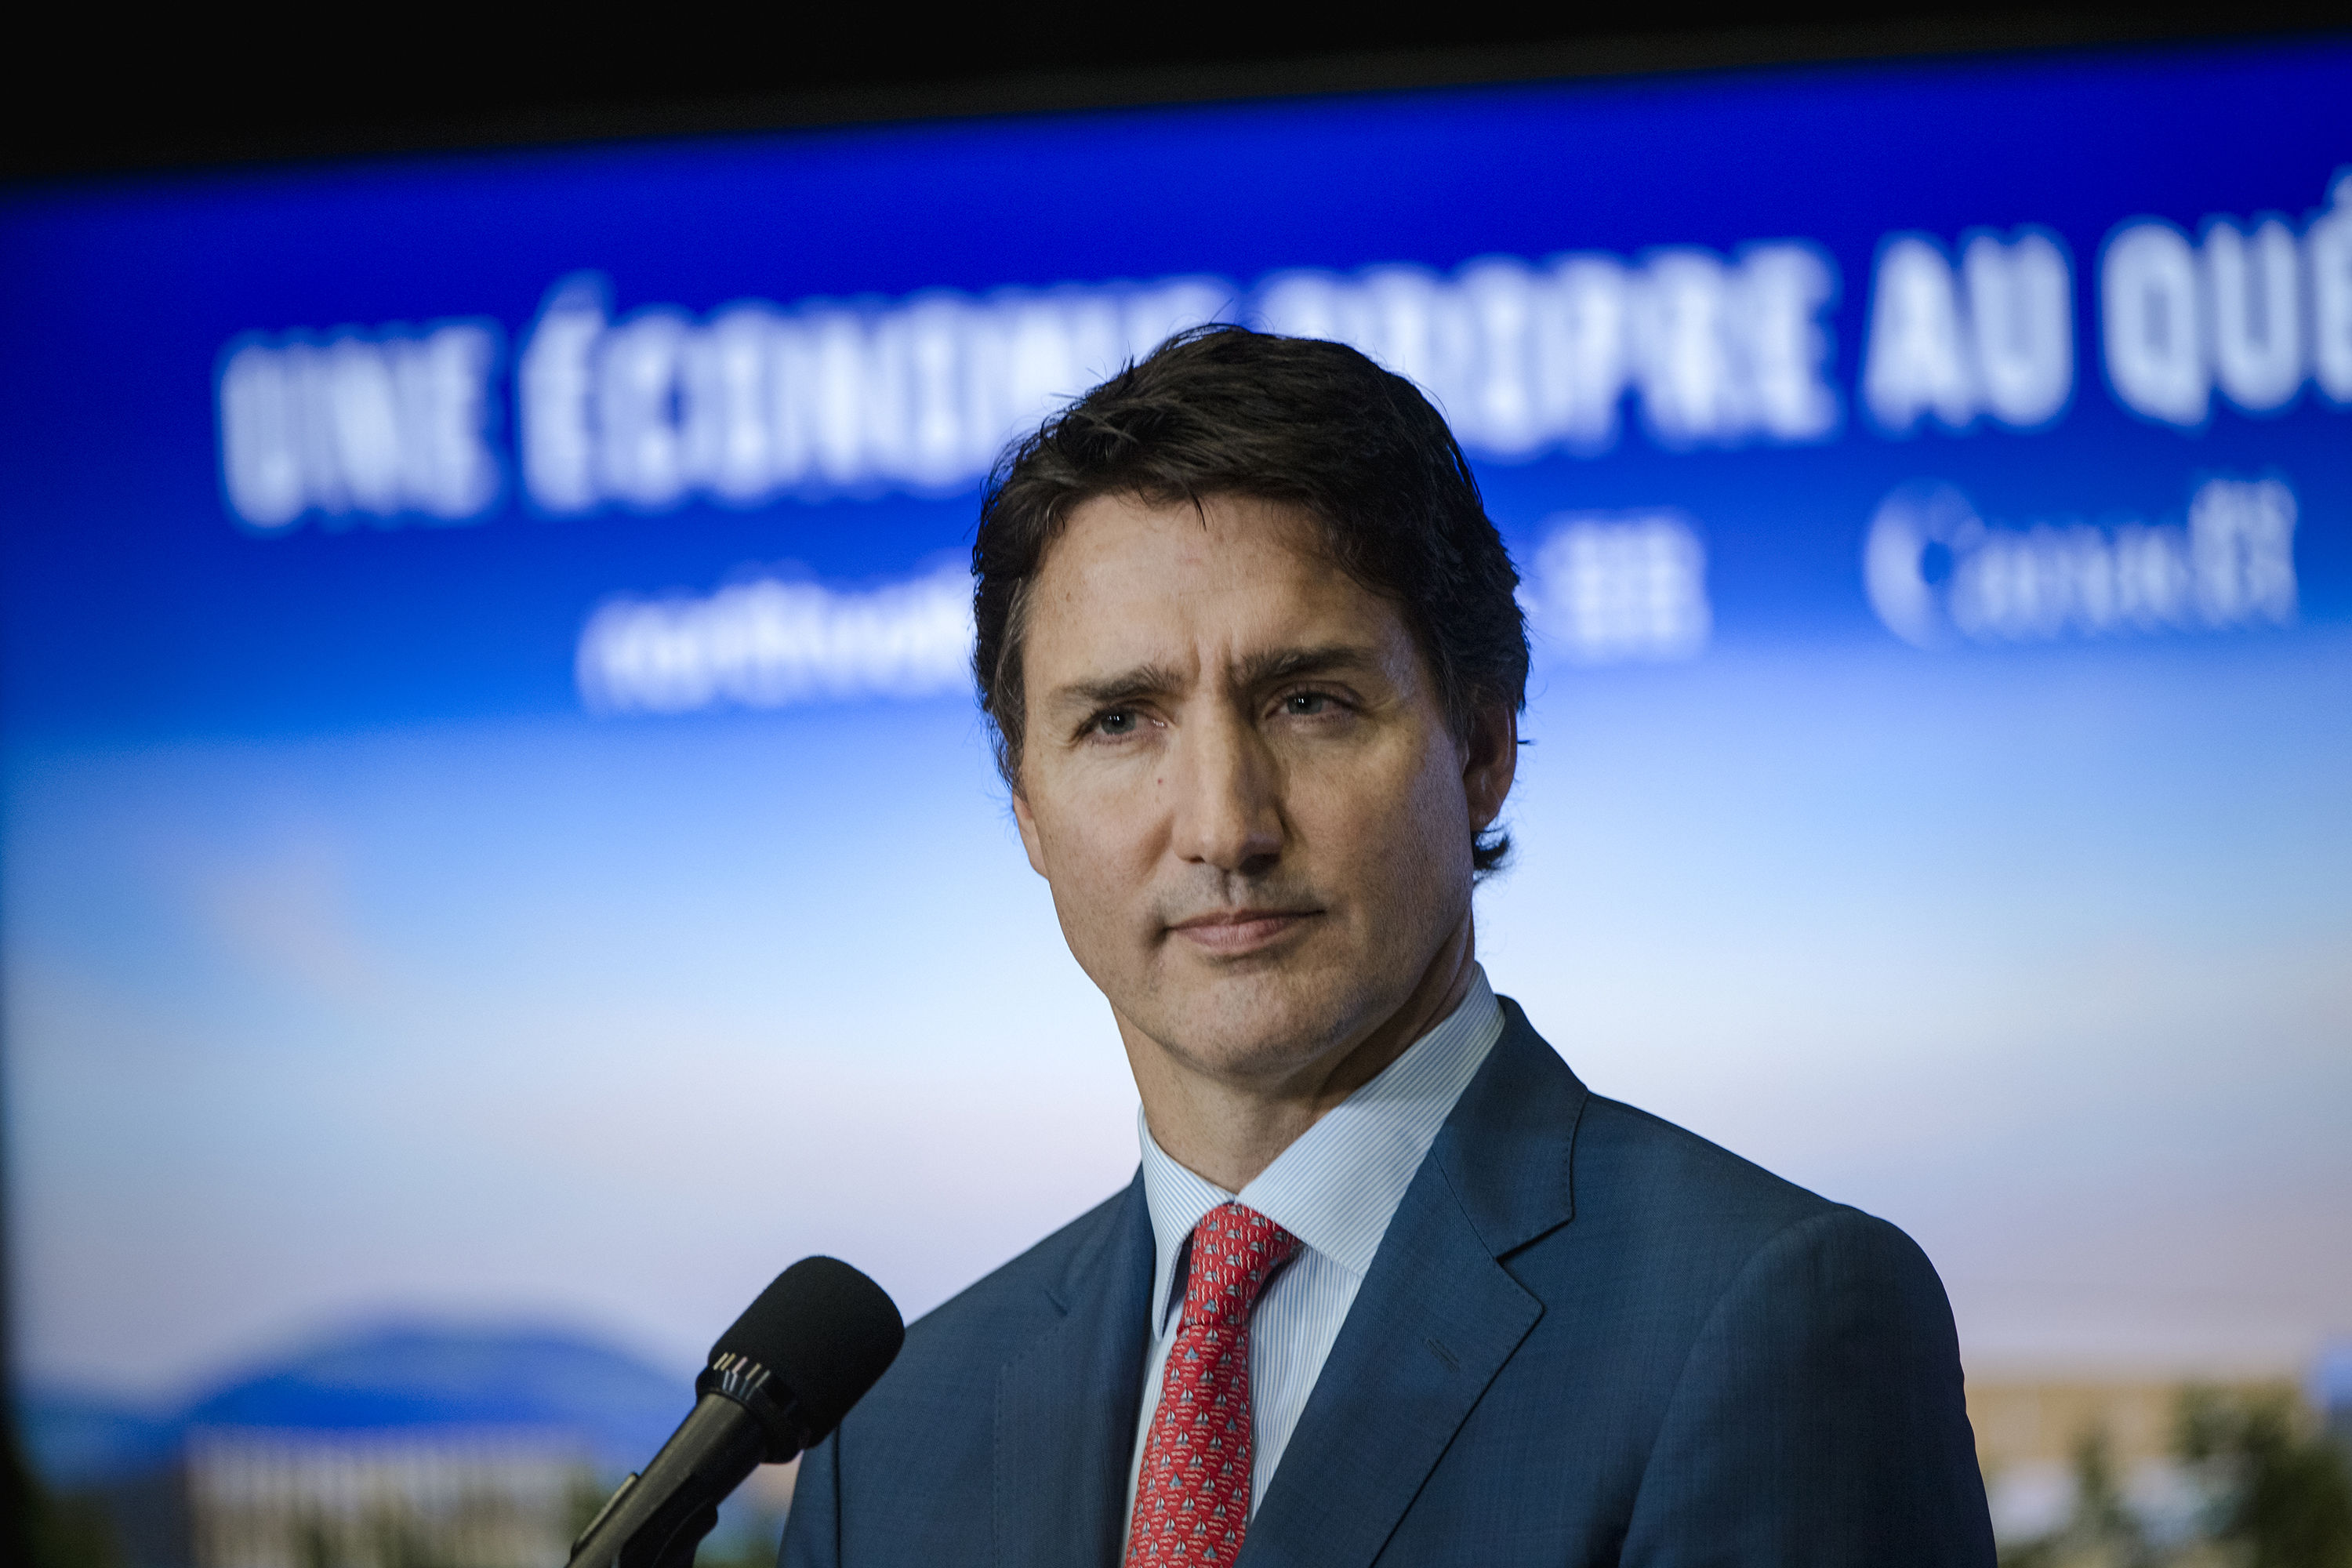 Canadian Prime Minister Justin Trudeau speaks at a news conference in Montreal, Canada, on September 28.